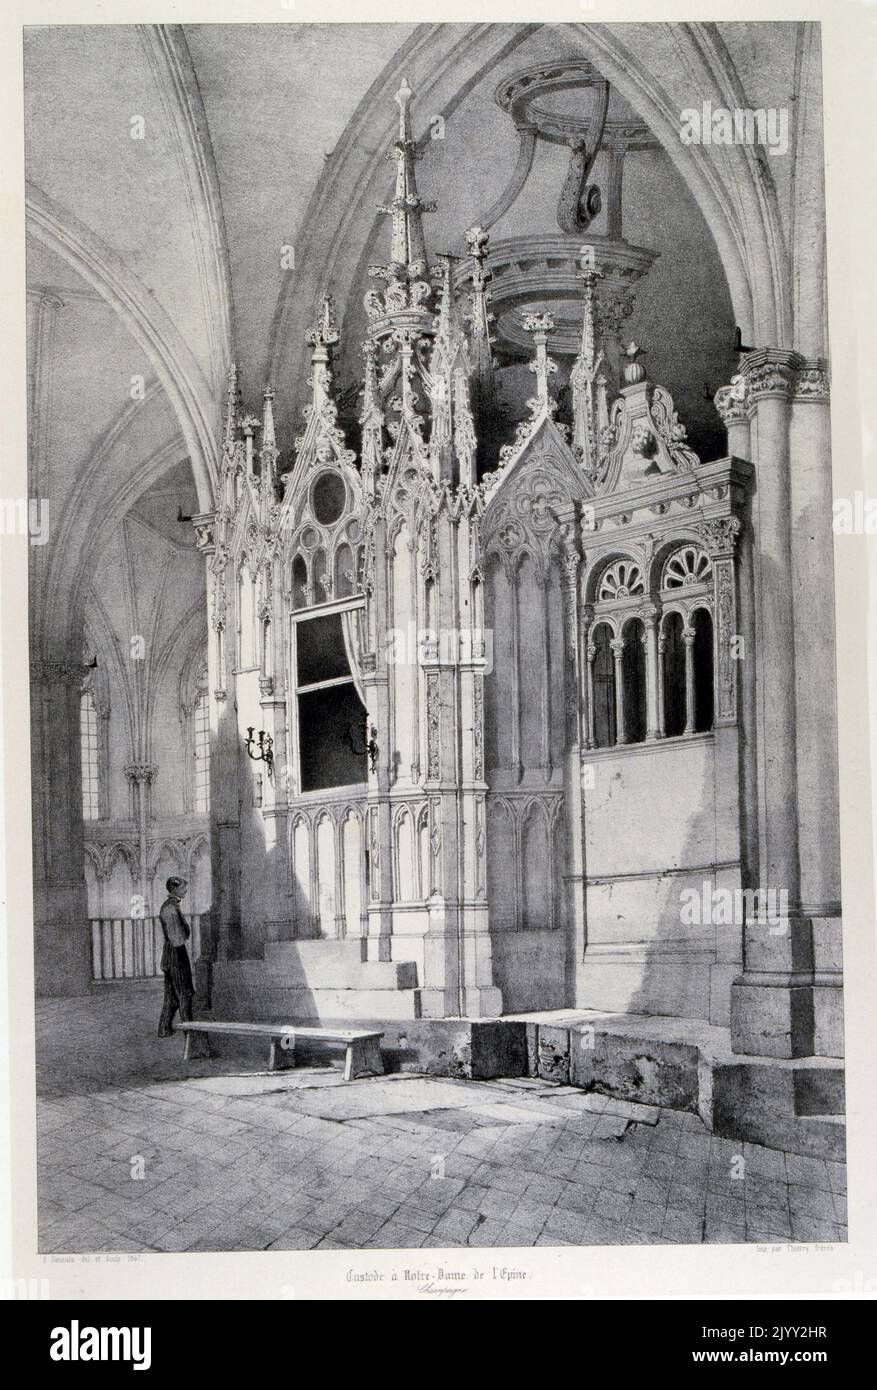 The Basilique Notre-Dame de l'Epine, near Chalons-en-Champagne by Isidore Justin Severin Taylor, baron Taylor 1789-1879, Artist and philanthropist. From 'Voyages Pittoresques' 1857. The Basilique Notre-Dame de l'Epine is a Roman Catholic basilica in the small village of L'Epine, Marne, near Chalons-en-Champagne and Verdun. It is a major masterpiece in the Flamboyant Gothic style. Stock Photo